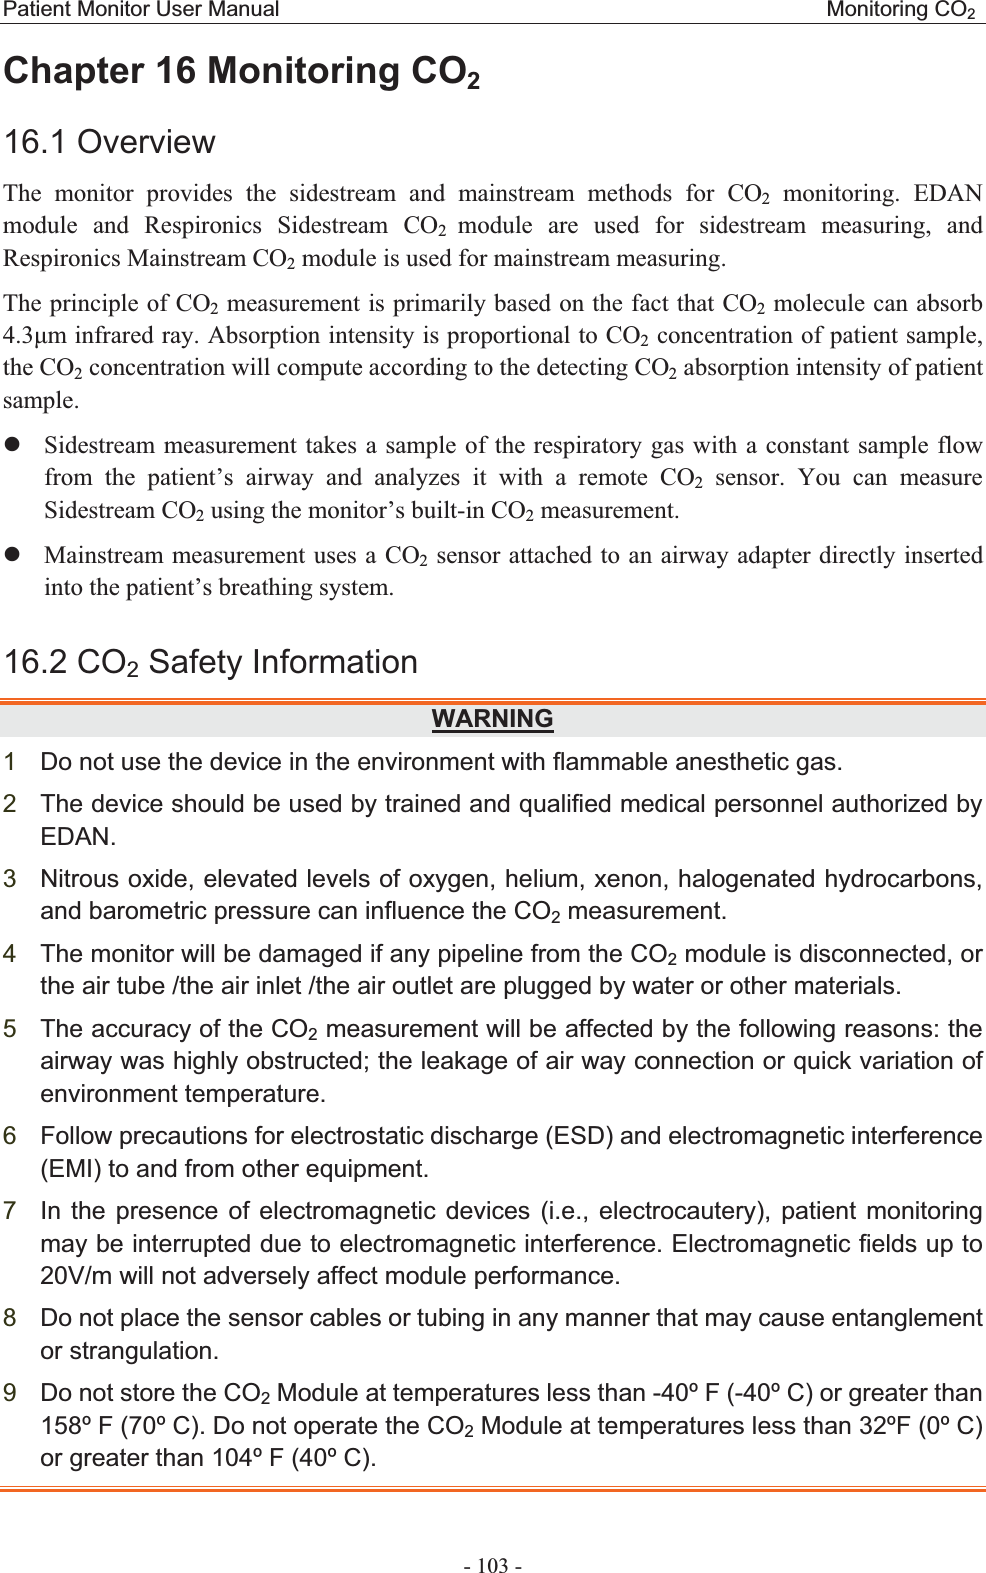 Patient Monitor User Manual                                                  Monitoring CO2 - 103 - Chapter 16 Monitoring CO216.1 Overview The monitor provides the sidestream and mainstream methods for CO2 monitoring. EDAN module and Respironics Sidestream CO2  module are used for sidestream measuring, and Respironics Mainstream CO2 module is used for mainstream measuring.   The principle of CO2 measurement is primarily based on the fact that CO2 molecule can absorb 4.3m infrared ray. Absorption intensity is proportional to CO2 concentration of patient sample, the CO2 concentration will compute according to the detecting CO2 absorption intensity of patient sample. zSidestream measurement takes a sample of the respiratory gas with a constant sample flow from the patient’s airway and analyzes it with a remote CO2 sensor. You can measure Sidestream CO2 using the monitor’s built-in CO2 measurement. zMainstream measurement uses a CO2 sensor attached to an airway adapter directly inserted into the patient’s breathing system.   16.2 CO2 Safety InformationWARNING1Do not use the device in the environment with flammable anesthetic gas. 2The device should be used by trained and qualified medical personnel authorized by EDAN.3Nitrous oxide, elevated levels of oxygen, helium, xenon, halogenated hydrocarbons, and barometric pressure can influence the CO2 measurement.   4The monitor will be damaged if any pipeline from the CO2 module is disconnected, or the air tube /the air inlet /the air outlet are plugged by water or other materials.   5The accuracy of the CO2 measurement will be affected by the following reasons: the airway was highly obstructed; the leakage of air way connection or quick variation of environment temperature. 6Follow precautions for electrostatic discharge (ESD) and electromagnetic interference (EMI) to and from other equipment. 7In the presence of electromagnetic devices (i.e., electrocautery), patient monitoring may be interrupted due to electromagnetic interference. Electromagnetic fields up to 20V/m will not adversely affect module performance. 8Do not place the sensor cables or tubing in any manner that may cause entanglement or strangulation. 9Do not store the CO2 Module at temperatures less than -40º F (-40º C) or greater than 158º F (70º C). Do not operate the CO2 Module at temperatures less than 32ºF (0º C) or greater than 104º F (40º C). 